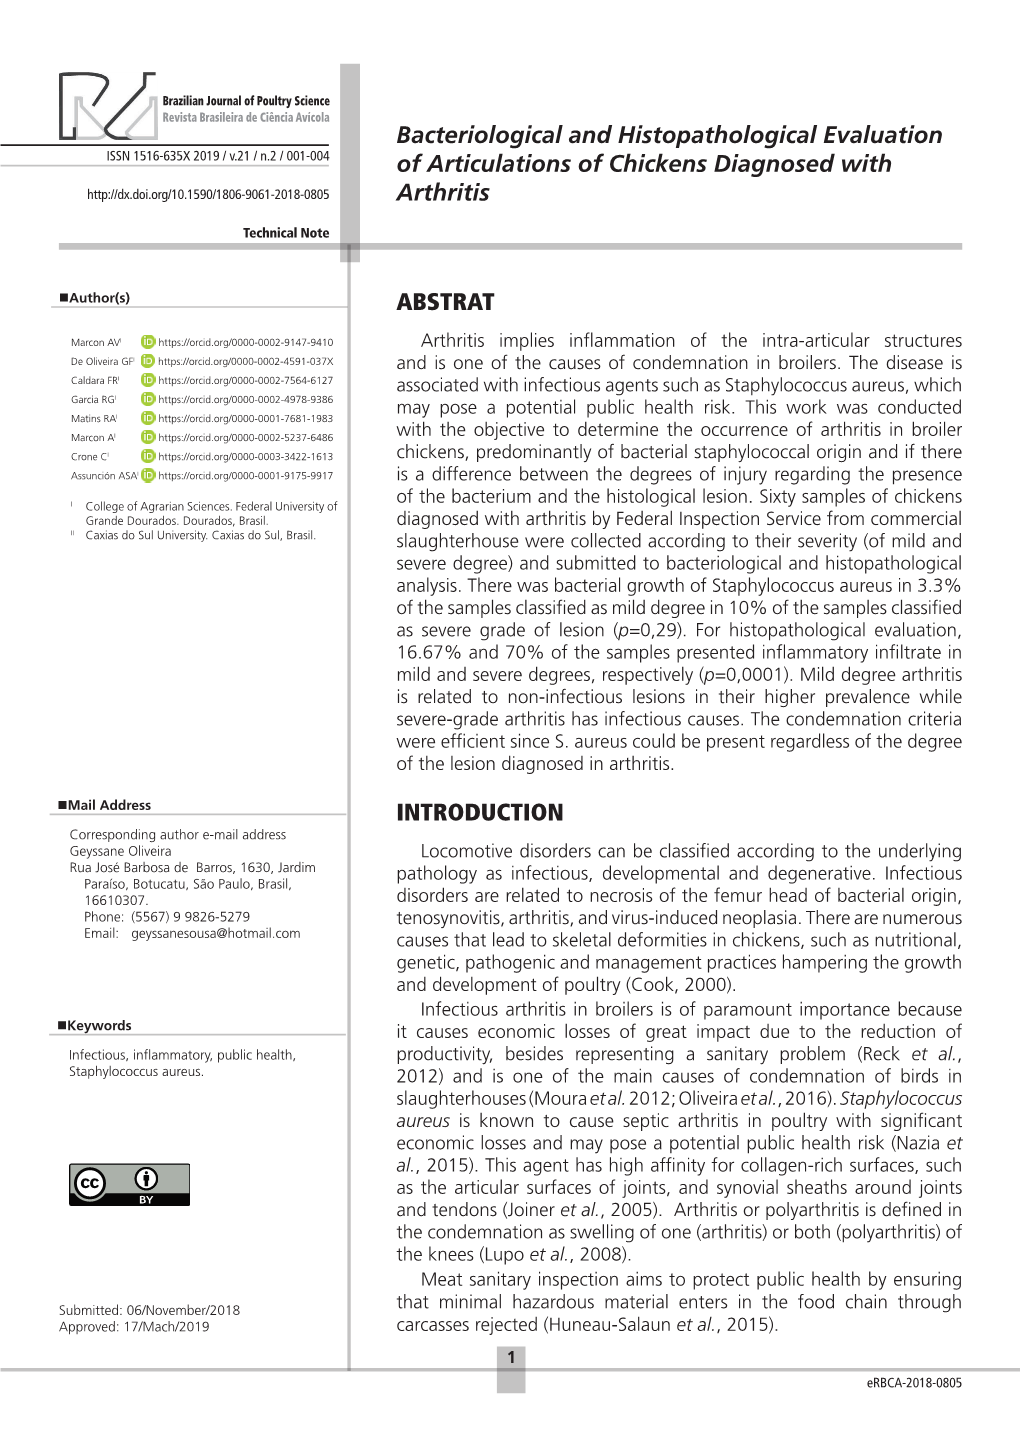 Bacteriological and Histopathological Evaluation of Articulations Of